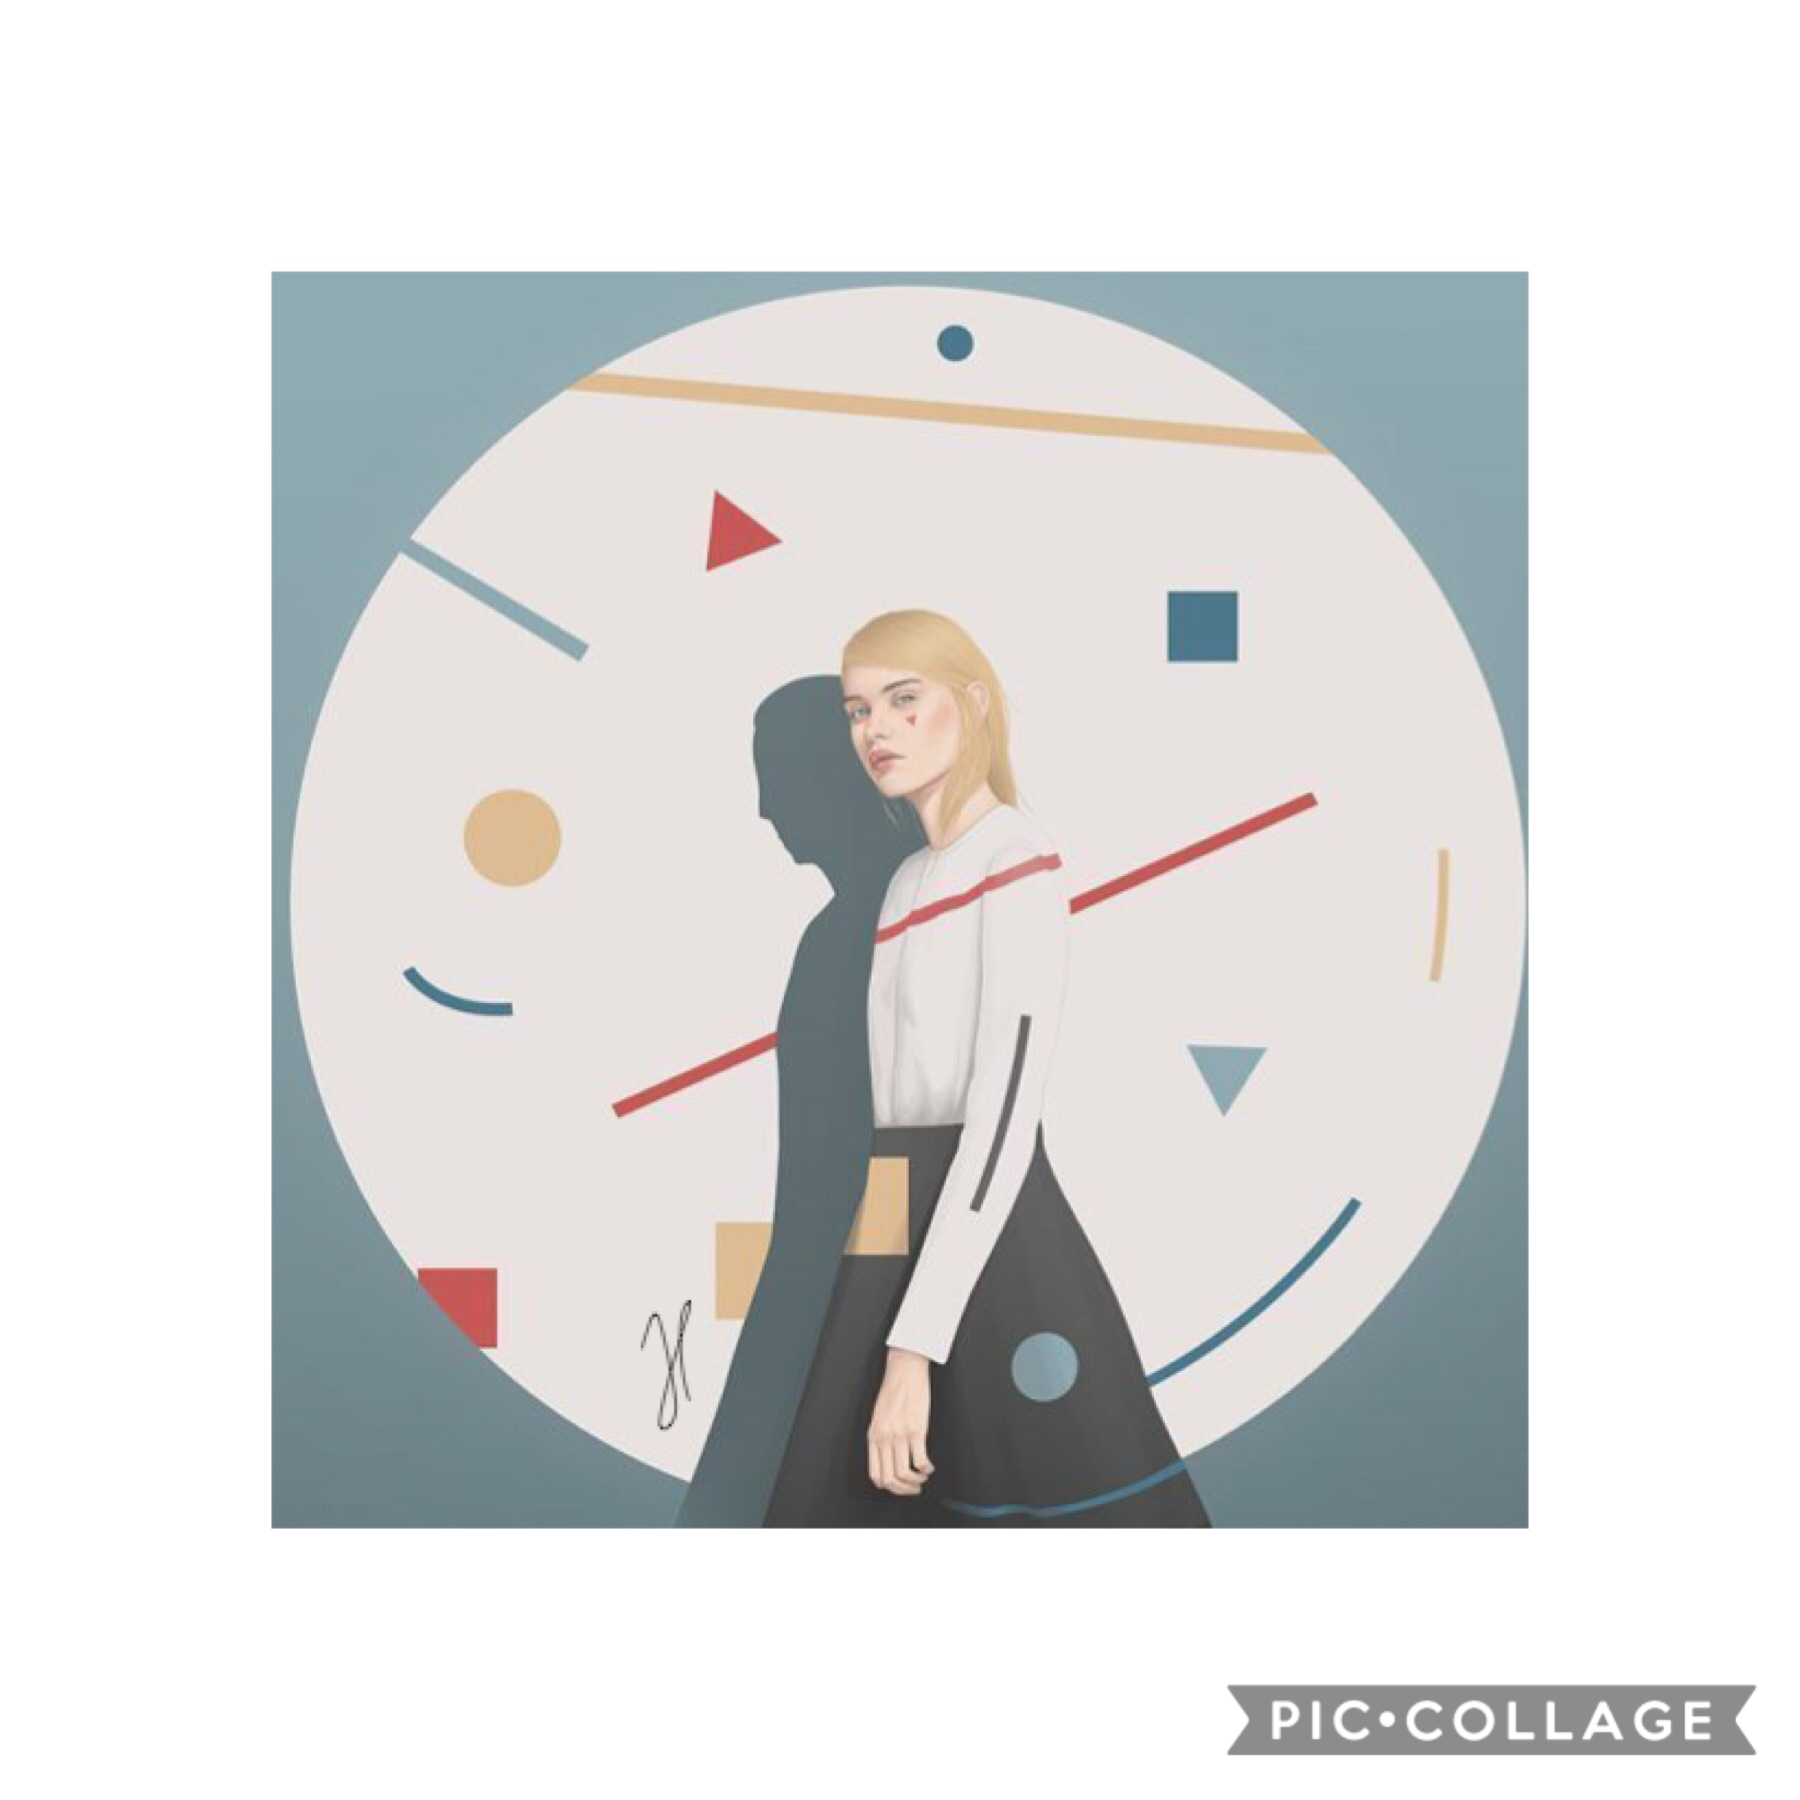 On the Run (4/8) — art project by Jeon Hyesoo

dont copy, redraw, repost, claim as yours or re-upload to any platform.